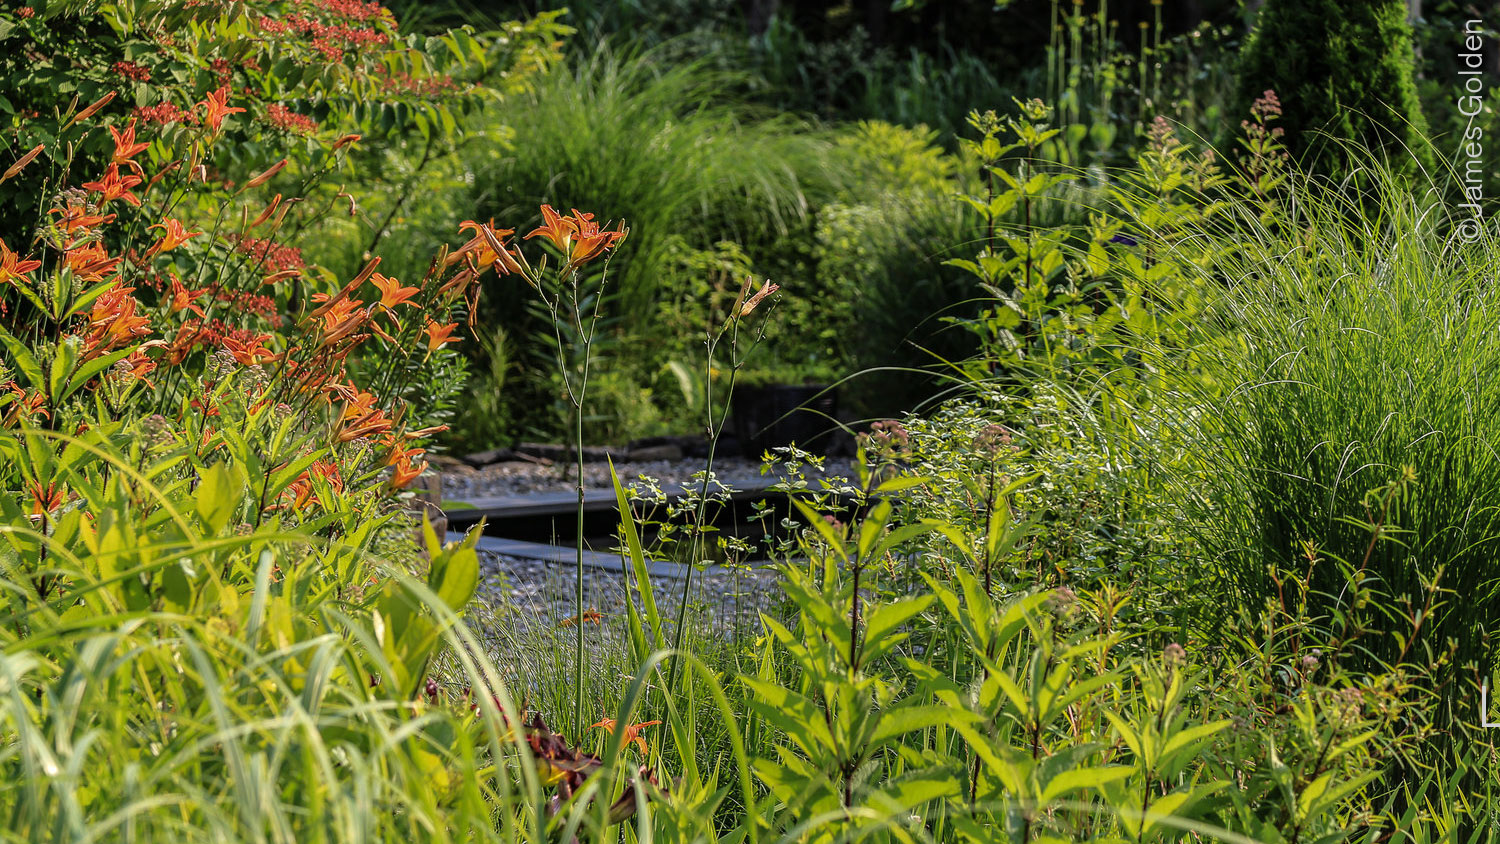 Orange flowers grow on long stems among green foliage, with shrubs and a water feature visible in the near distance